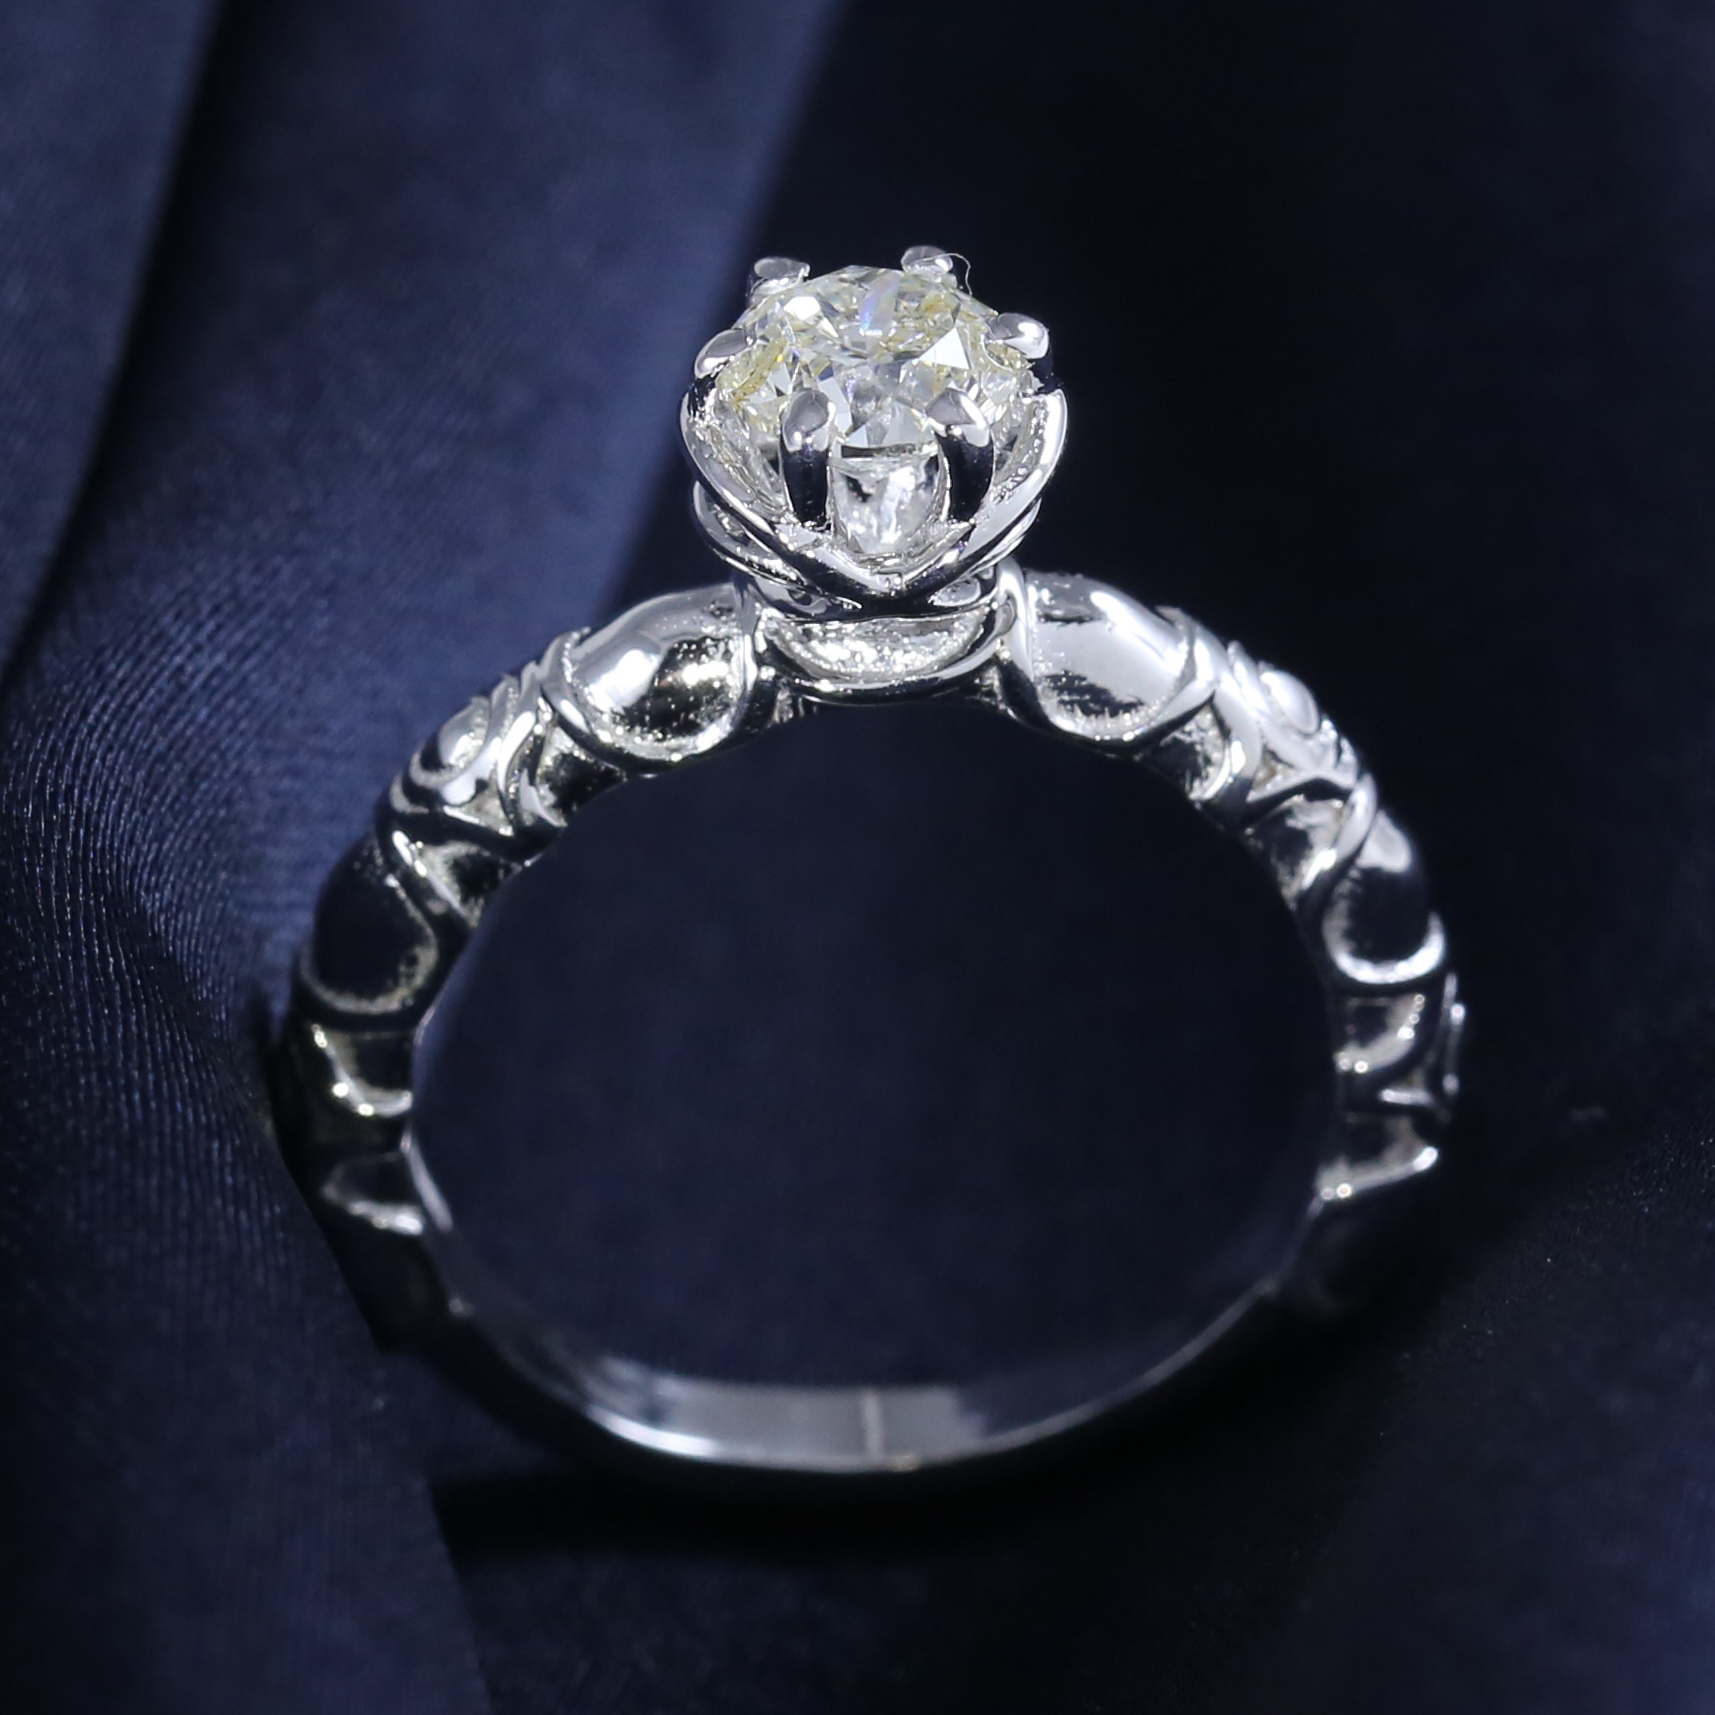 14 K / 585 White Gold Solitaire Diamond Ring - Image 3 of 9